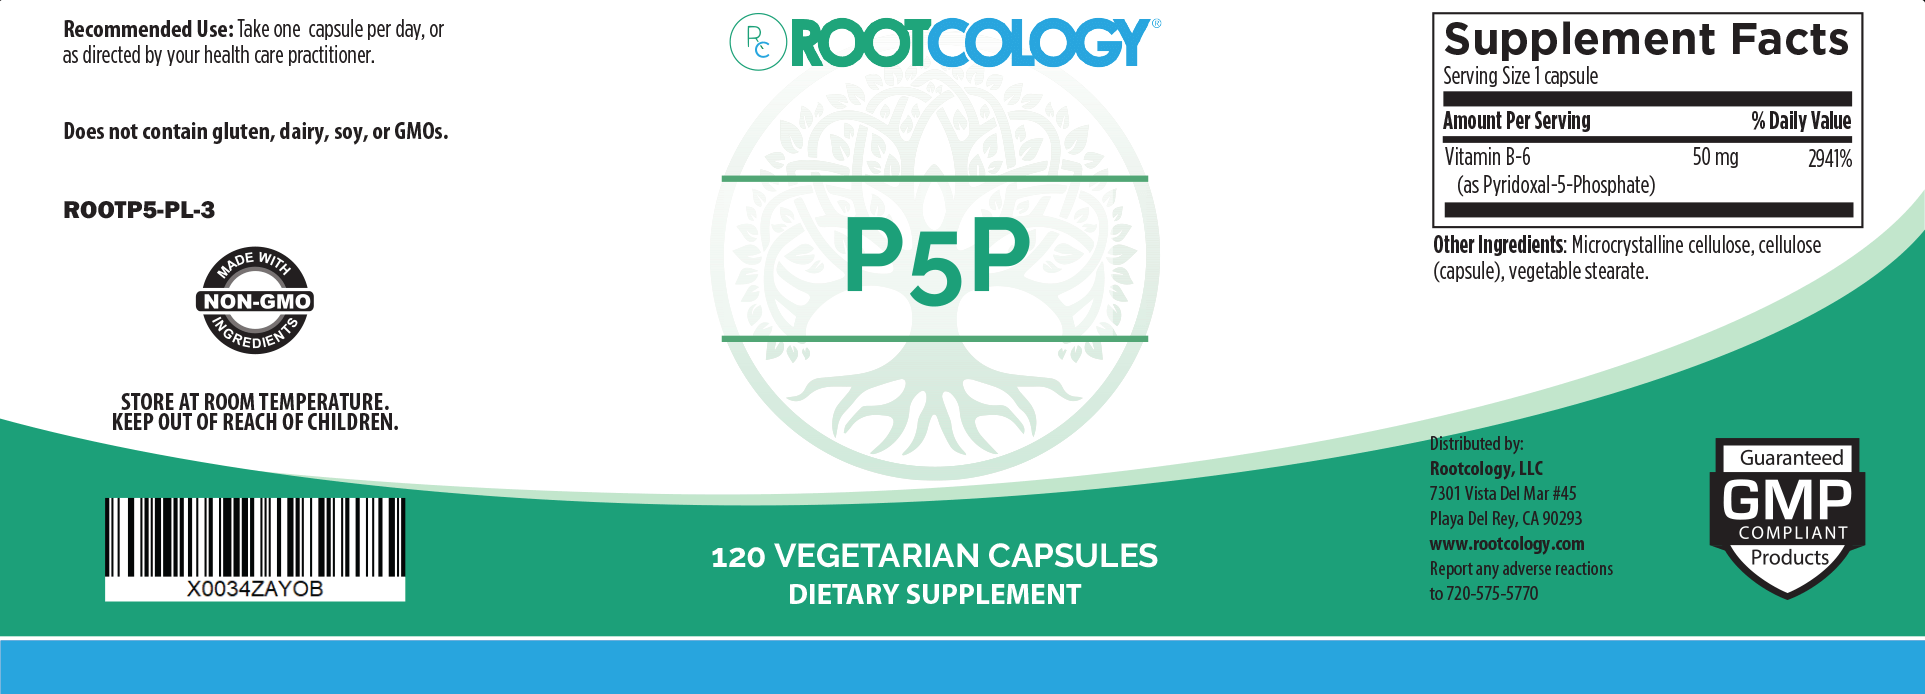 Rootcology P5P Supplement Label